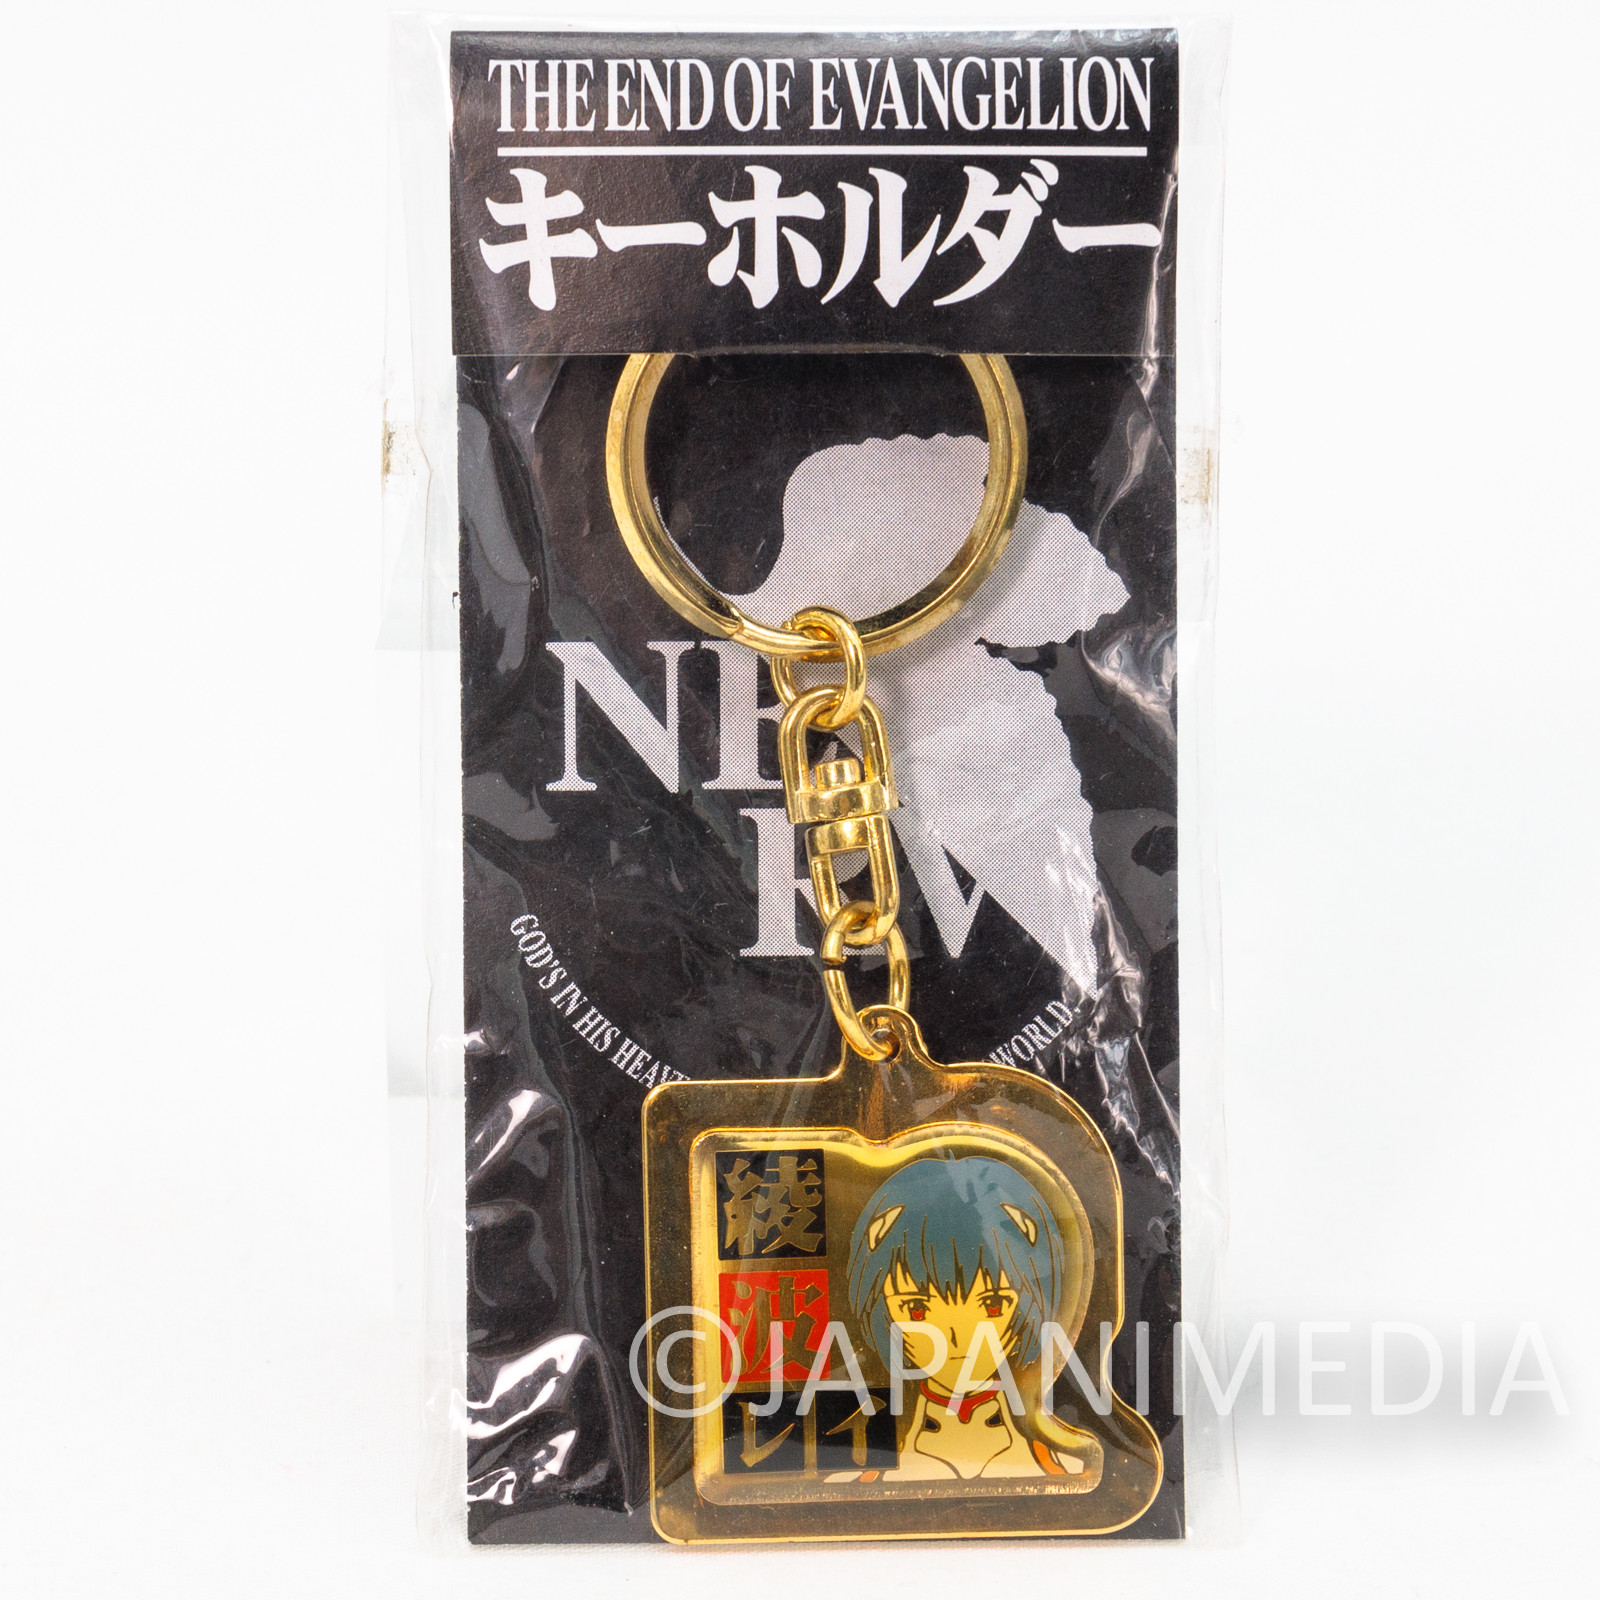 The End of Evangelion Rei Ayanami Metal Plate Keychain Theater Limited JAPAN ANIME